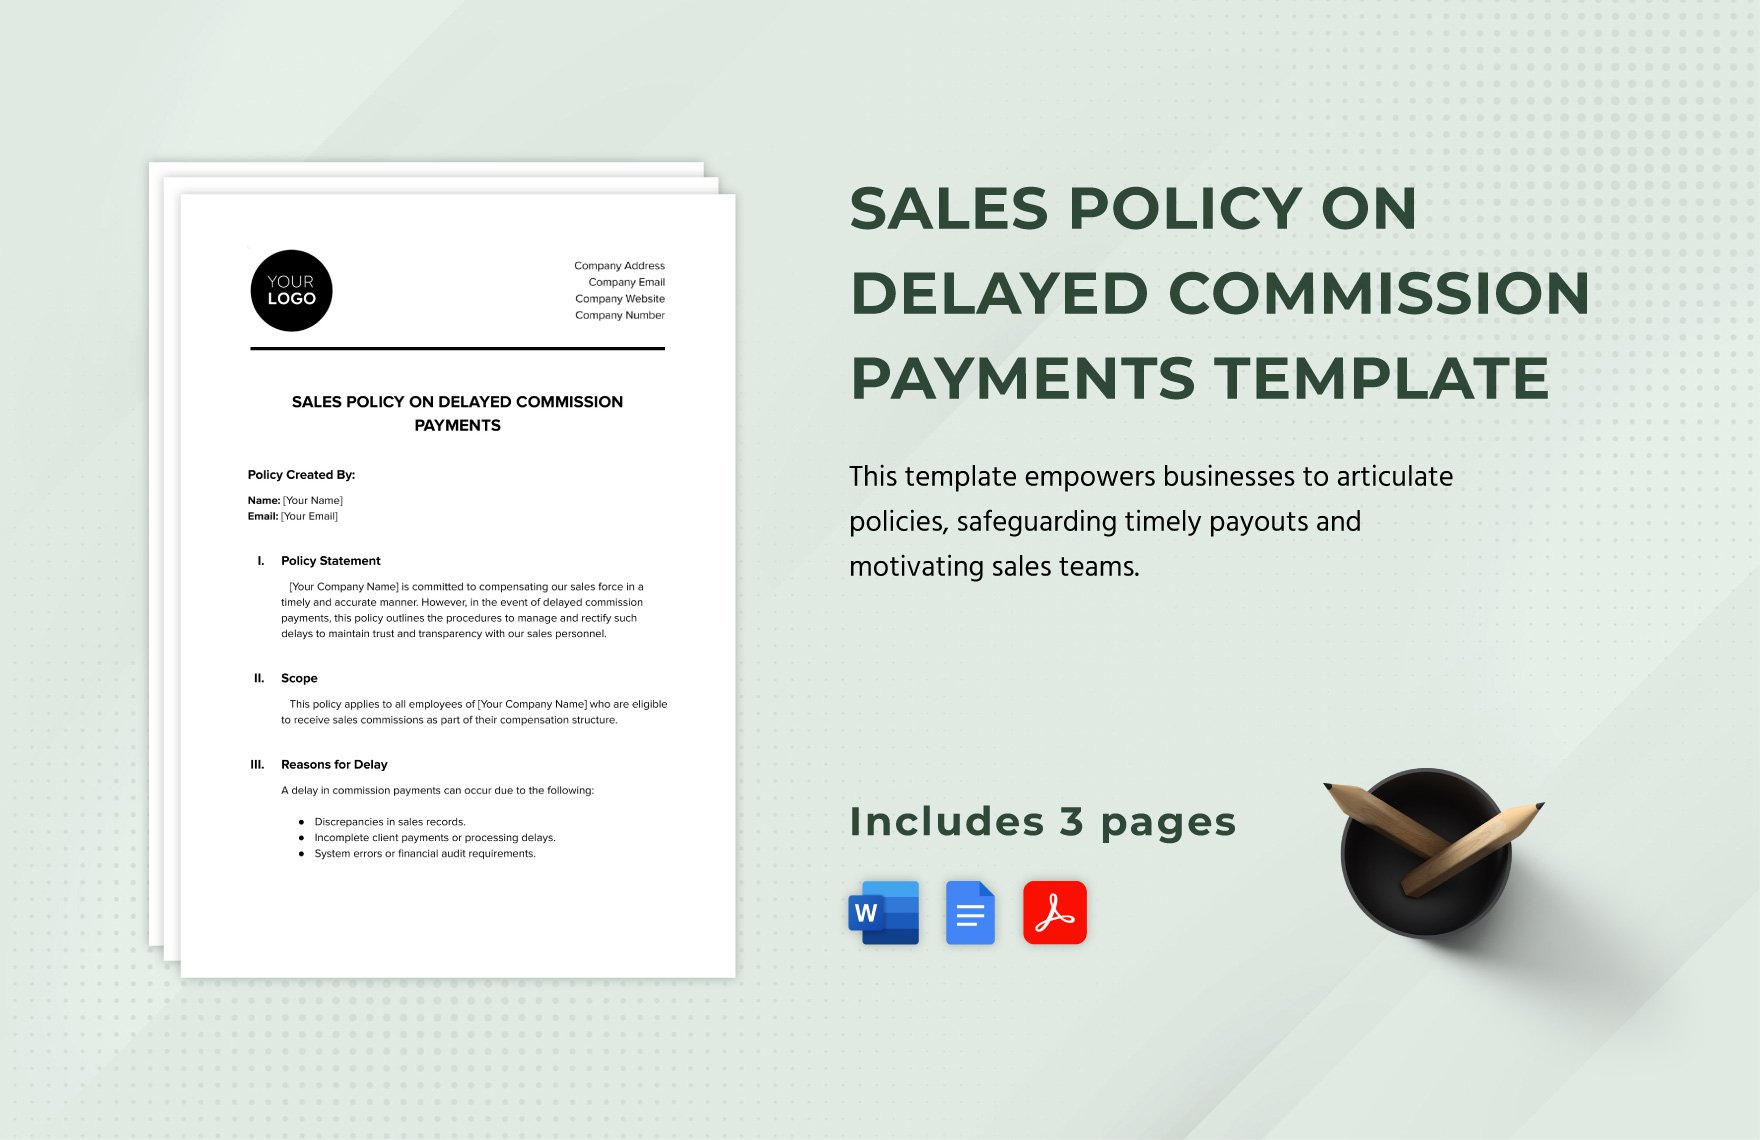 Sales Policy on Delayed Commission Payments Template